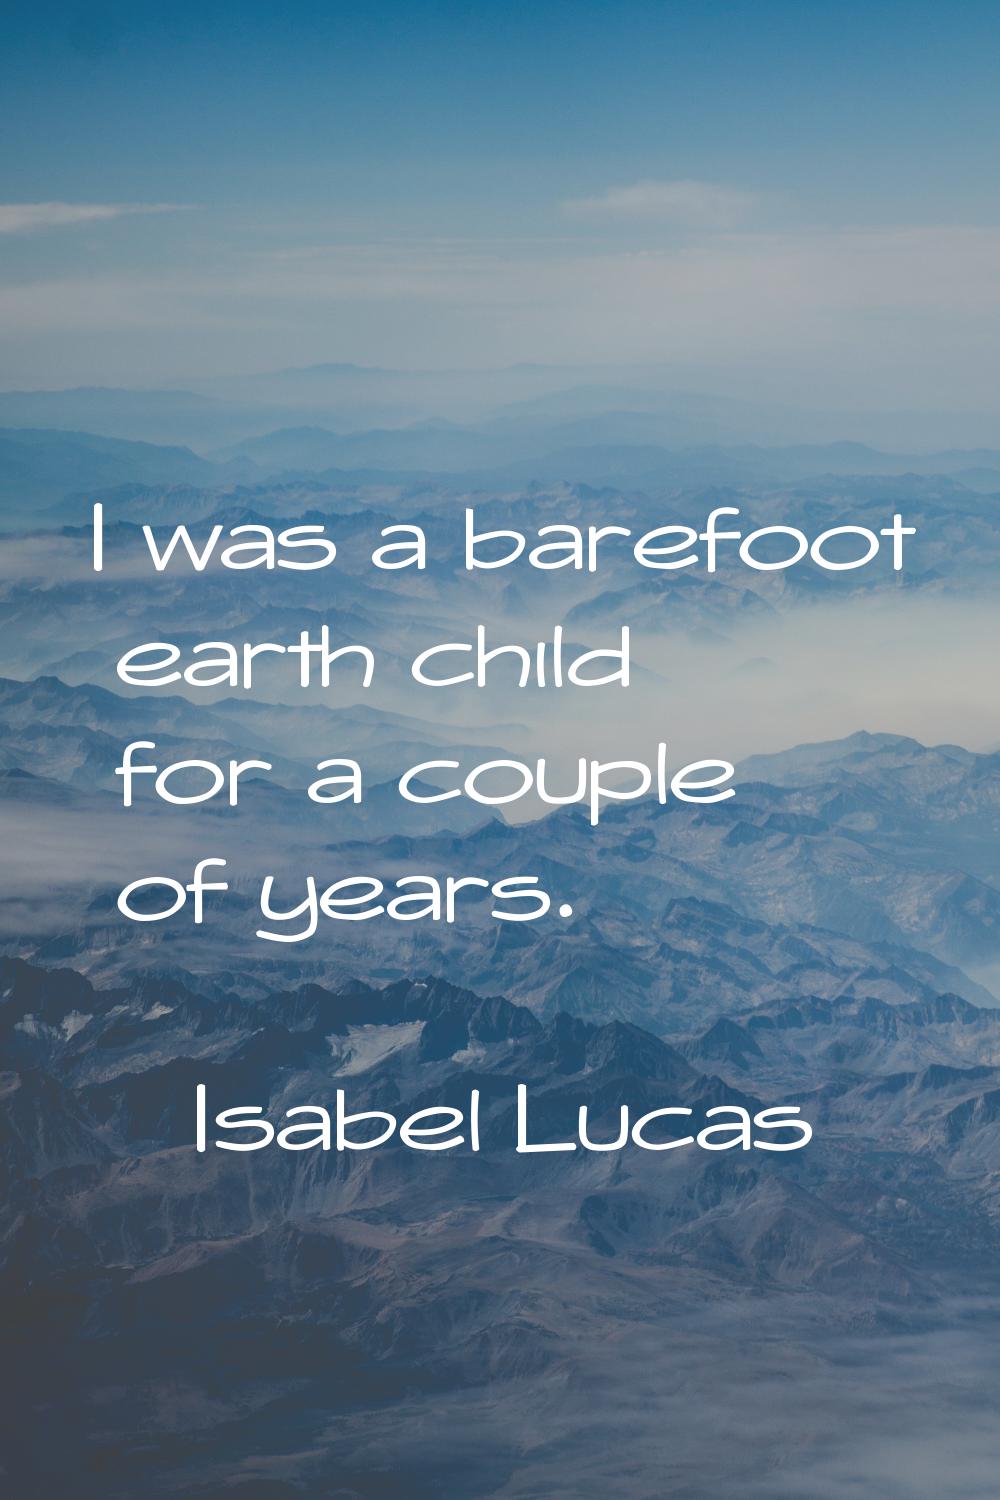 I was a barefoot earth child for a couple of years.